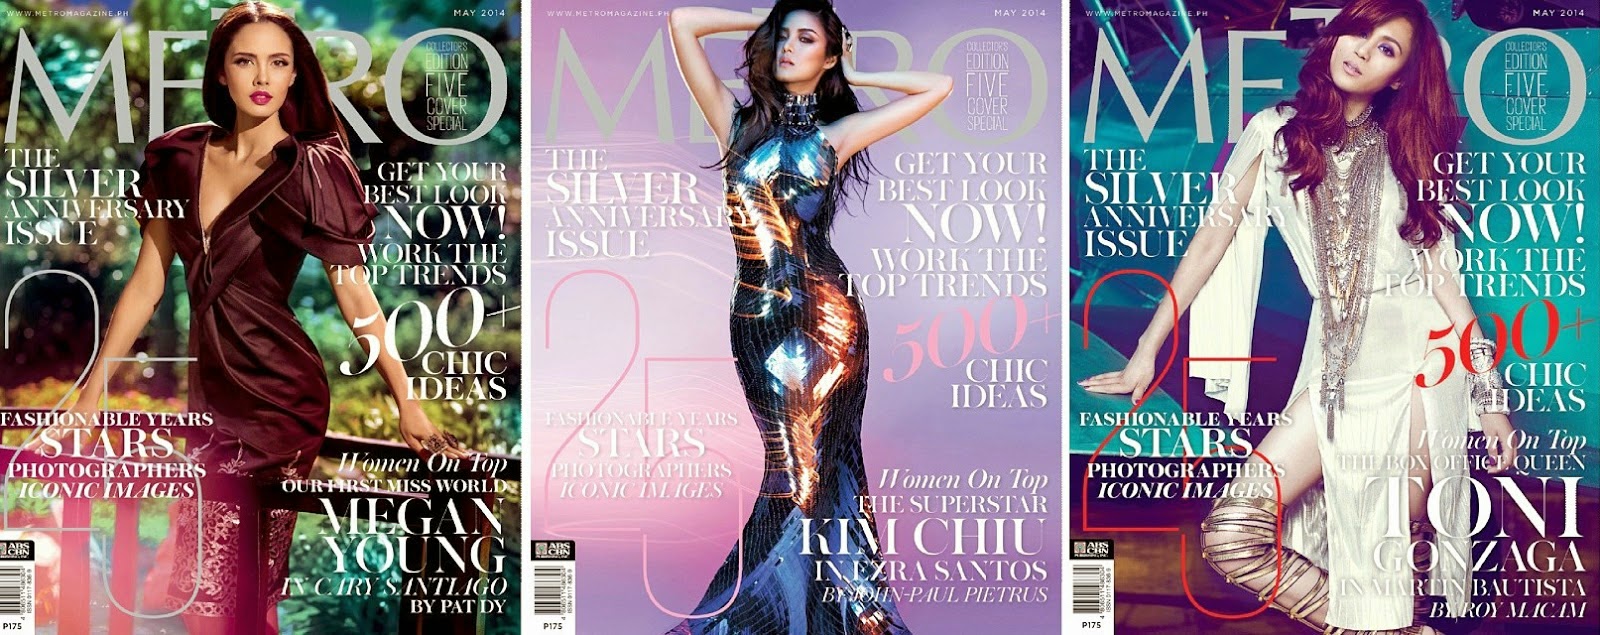 As Metro Magazine celebrates its Silver Anniversary, it's May 2014 issue features 5 of the most hottest female stars of today, namely Megan Young, Kim Chiu, Toni Gonzaga, Marian Rivera and Liza Soberano.